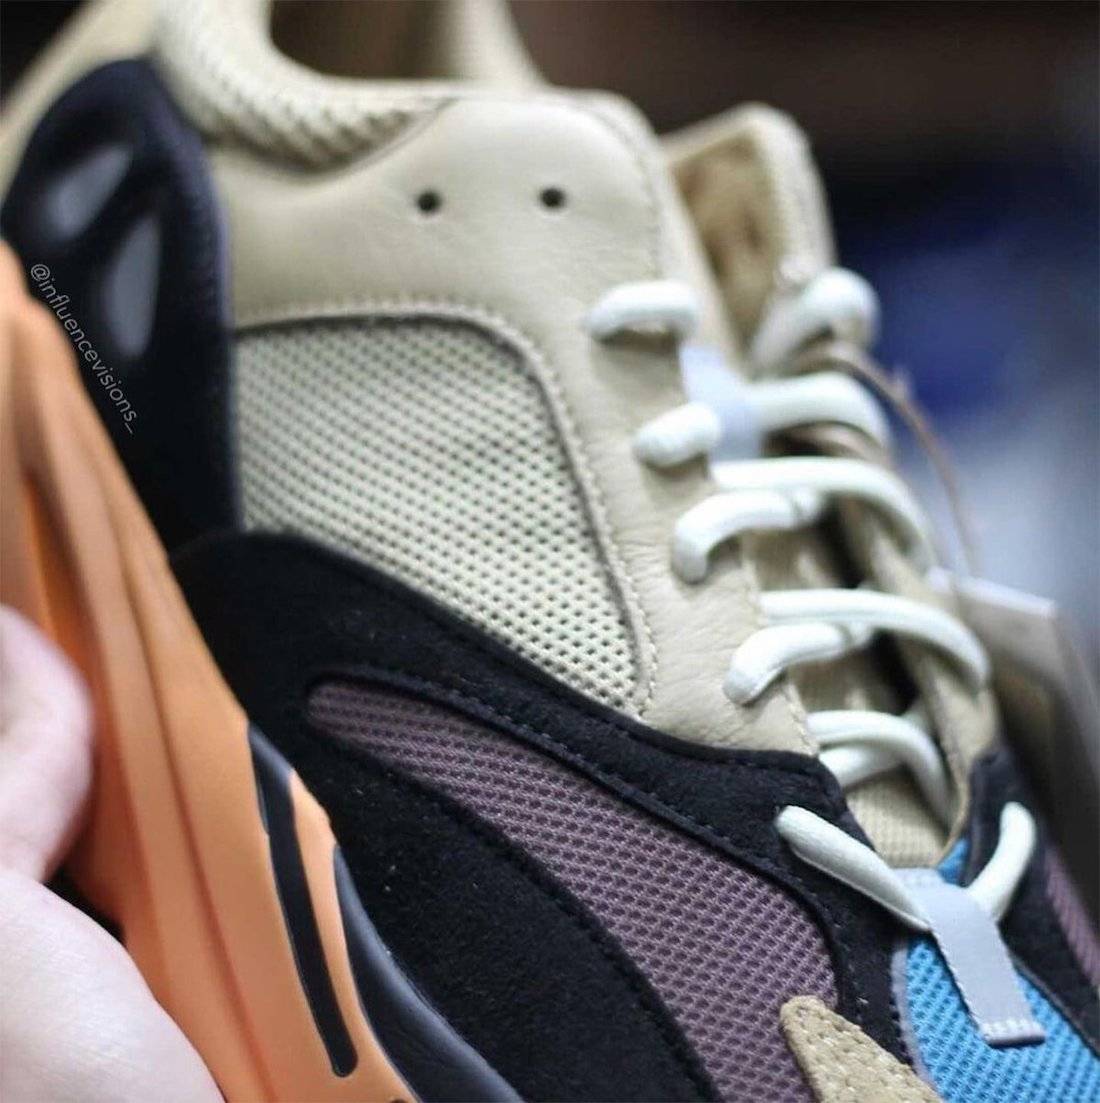 adidas-Yeezy-Boost-700-Enflame-Amber-Release-Date-Price-6